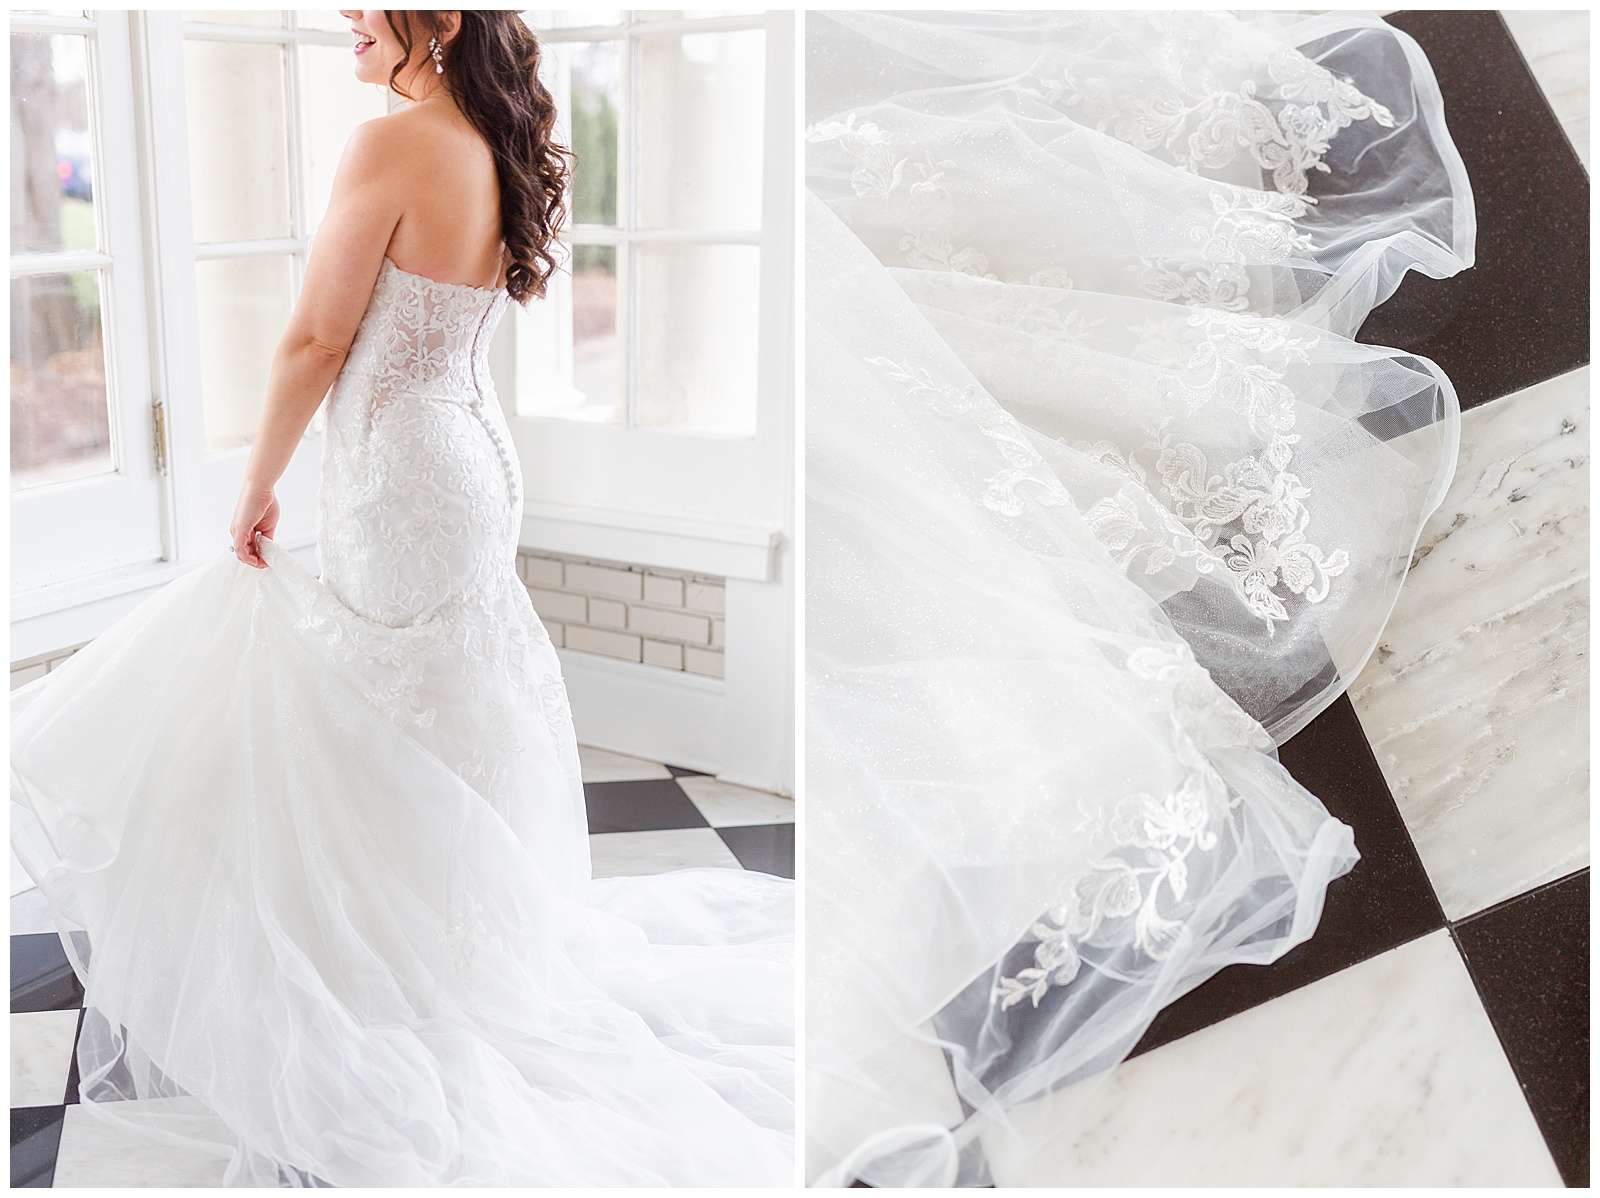 Bride's Lace Wedding Dress Ideas from Light and Airy Outdoor Wedding at Separk Mansion in Gastonia, NC | Kevyn Dixon Photography